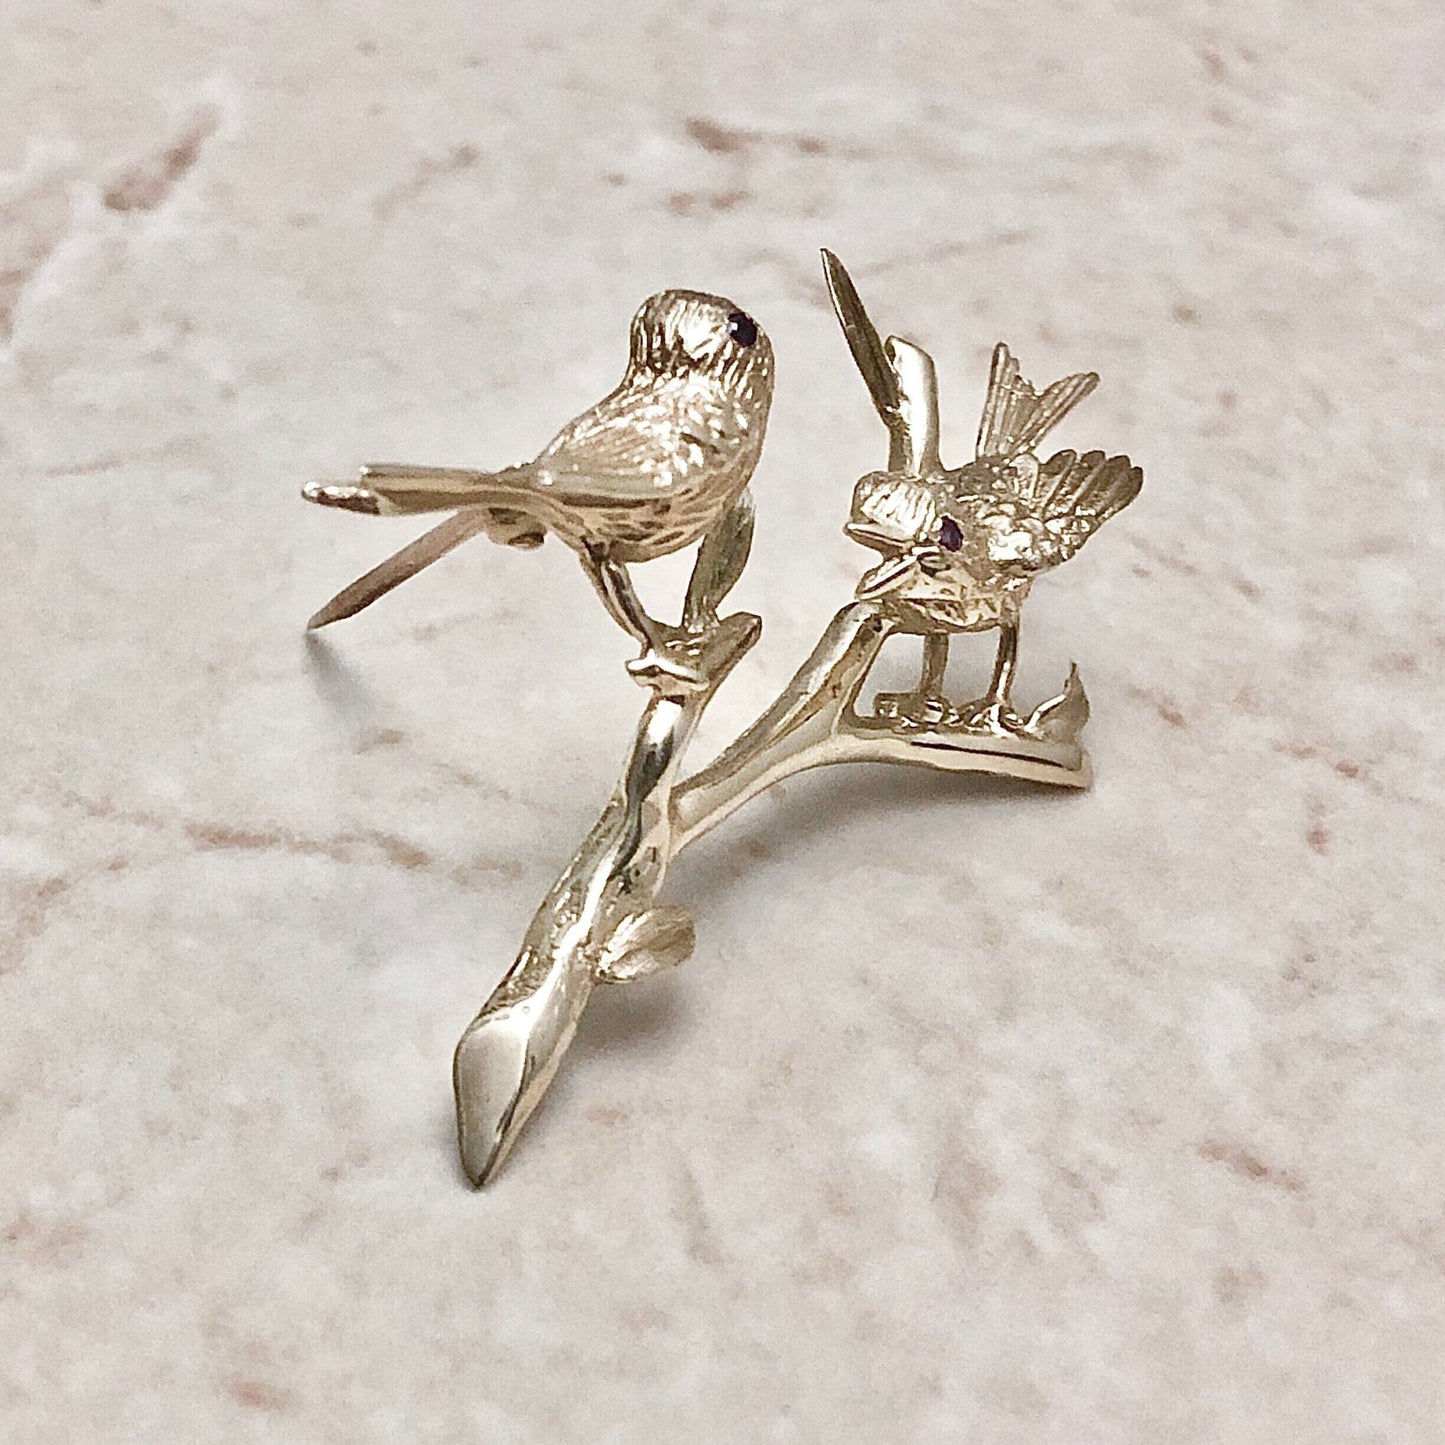 Exquisite Vintage 14K Natural Ruby Brooch - Yellow Gold Pin - Bird Brooch - Birthday Gift For Her - July Birthstone